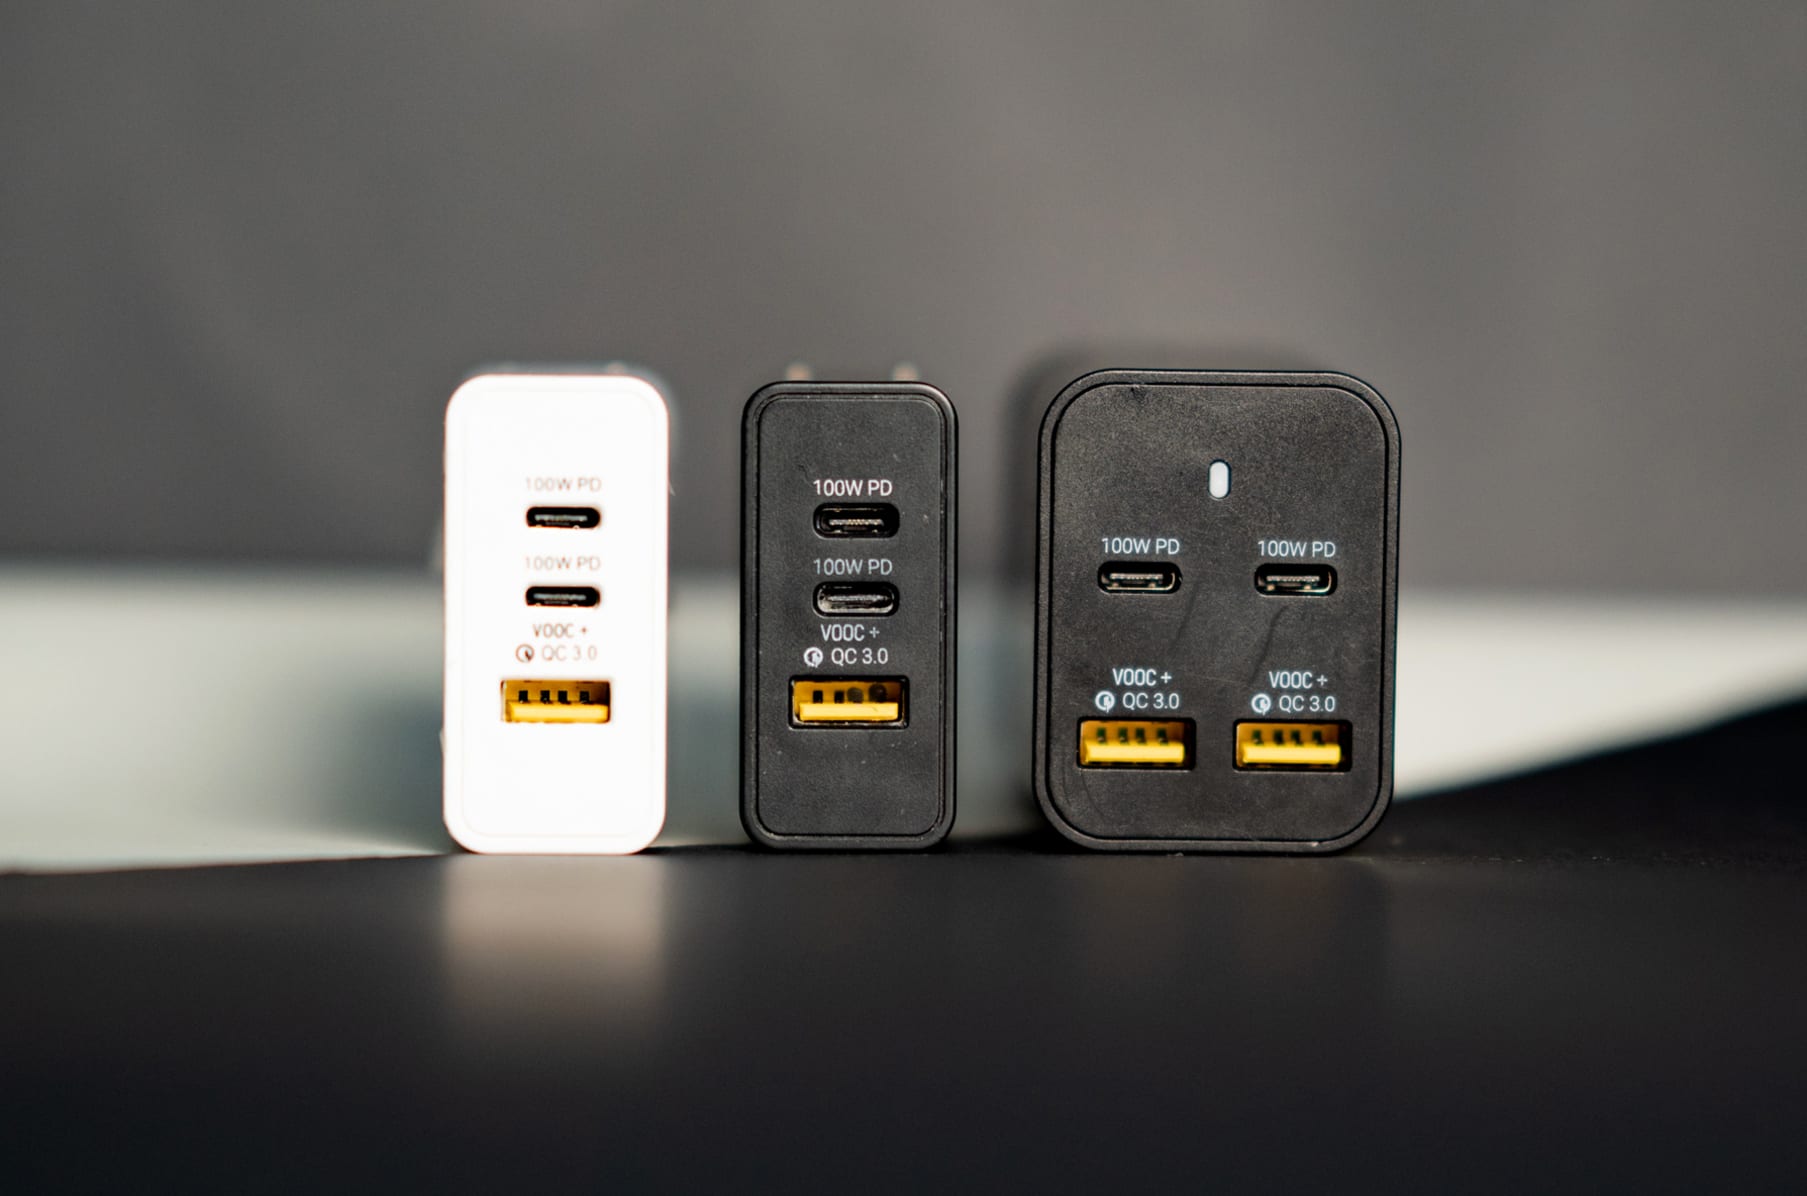 Chargeasap's Omega is the World's smallest 200W GaN USB-C Charger